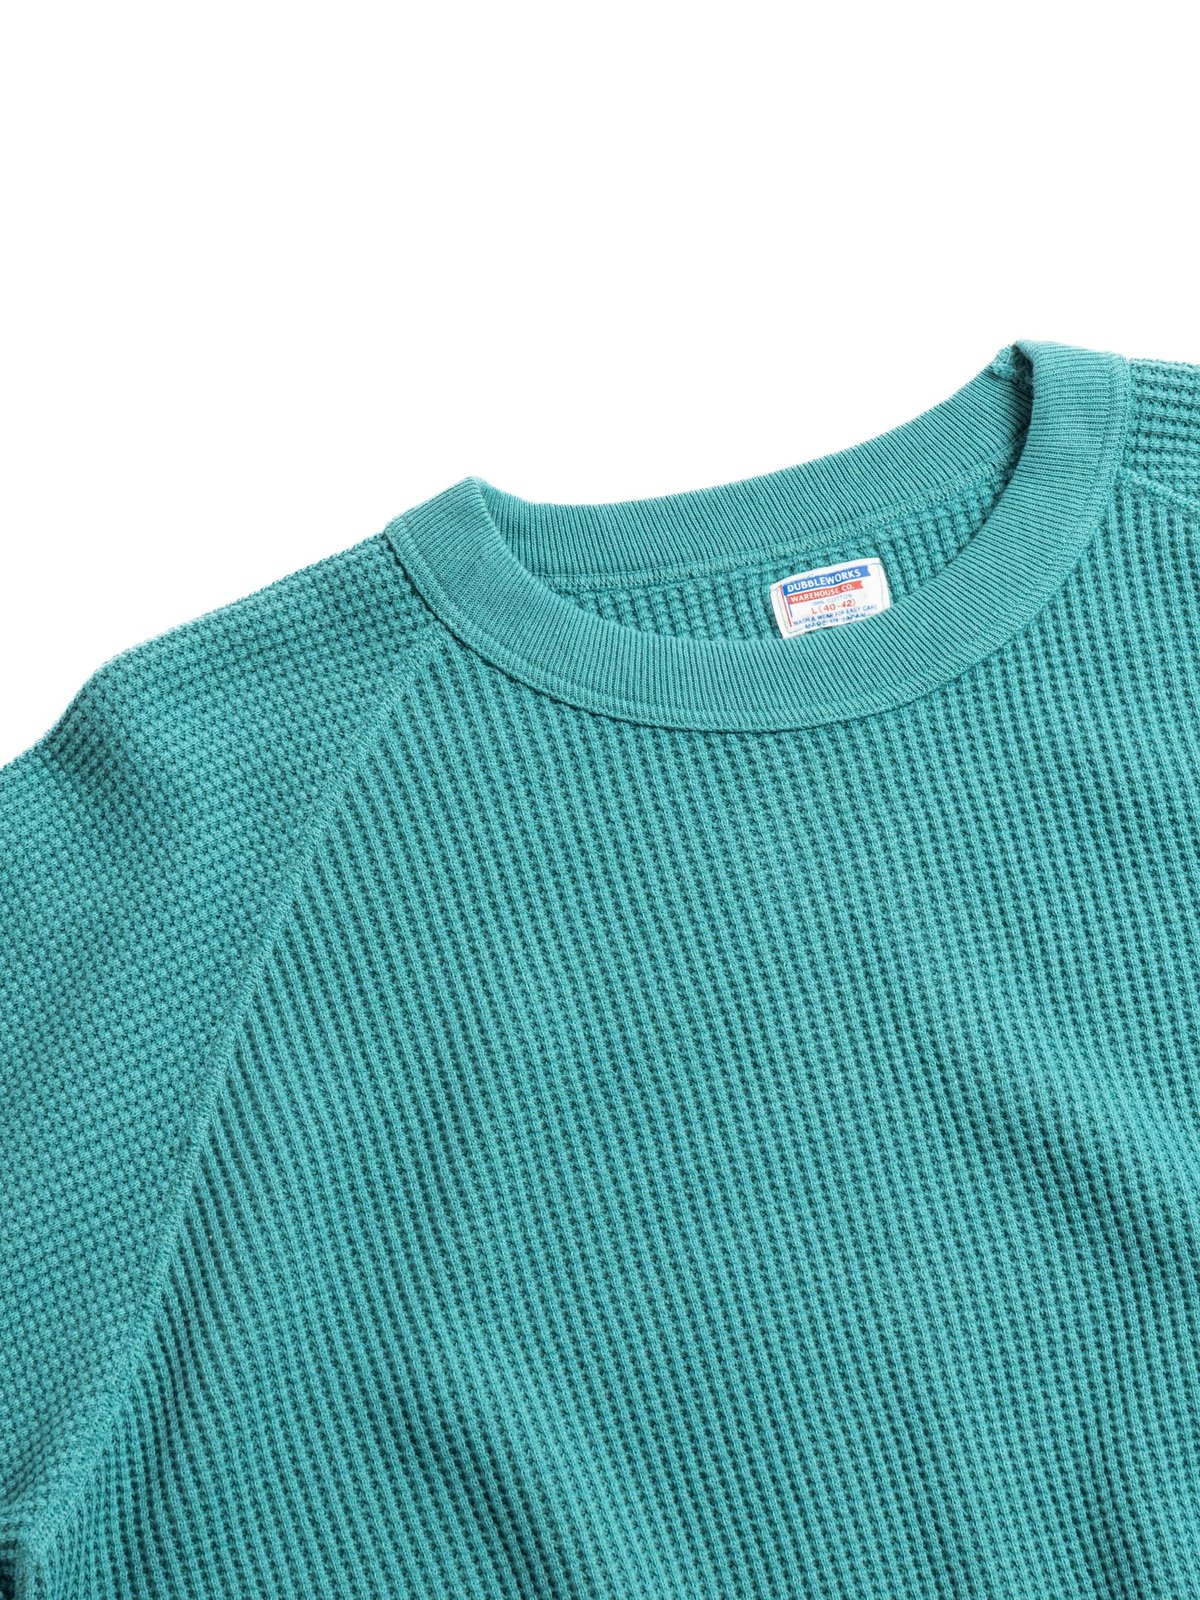 LOT.59001 HEAVY WAFFLE L/S TEE TURQUOISE - Image 3